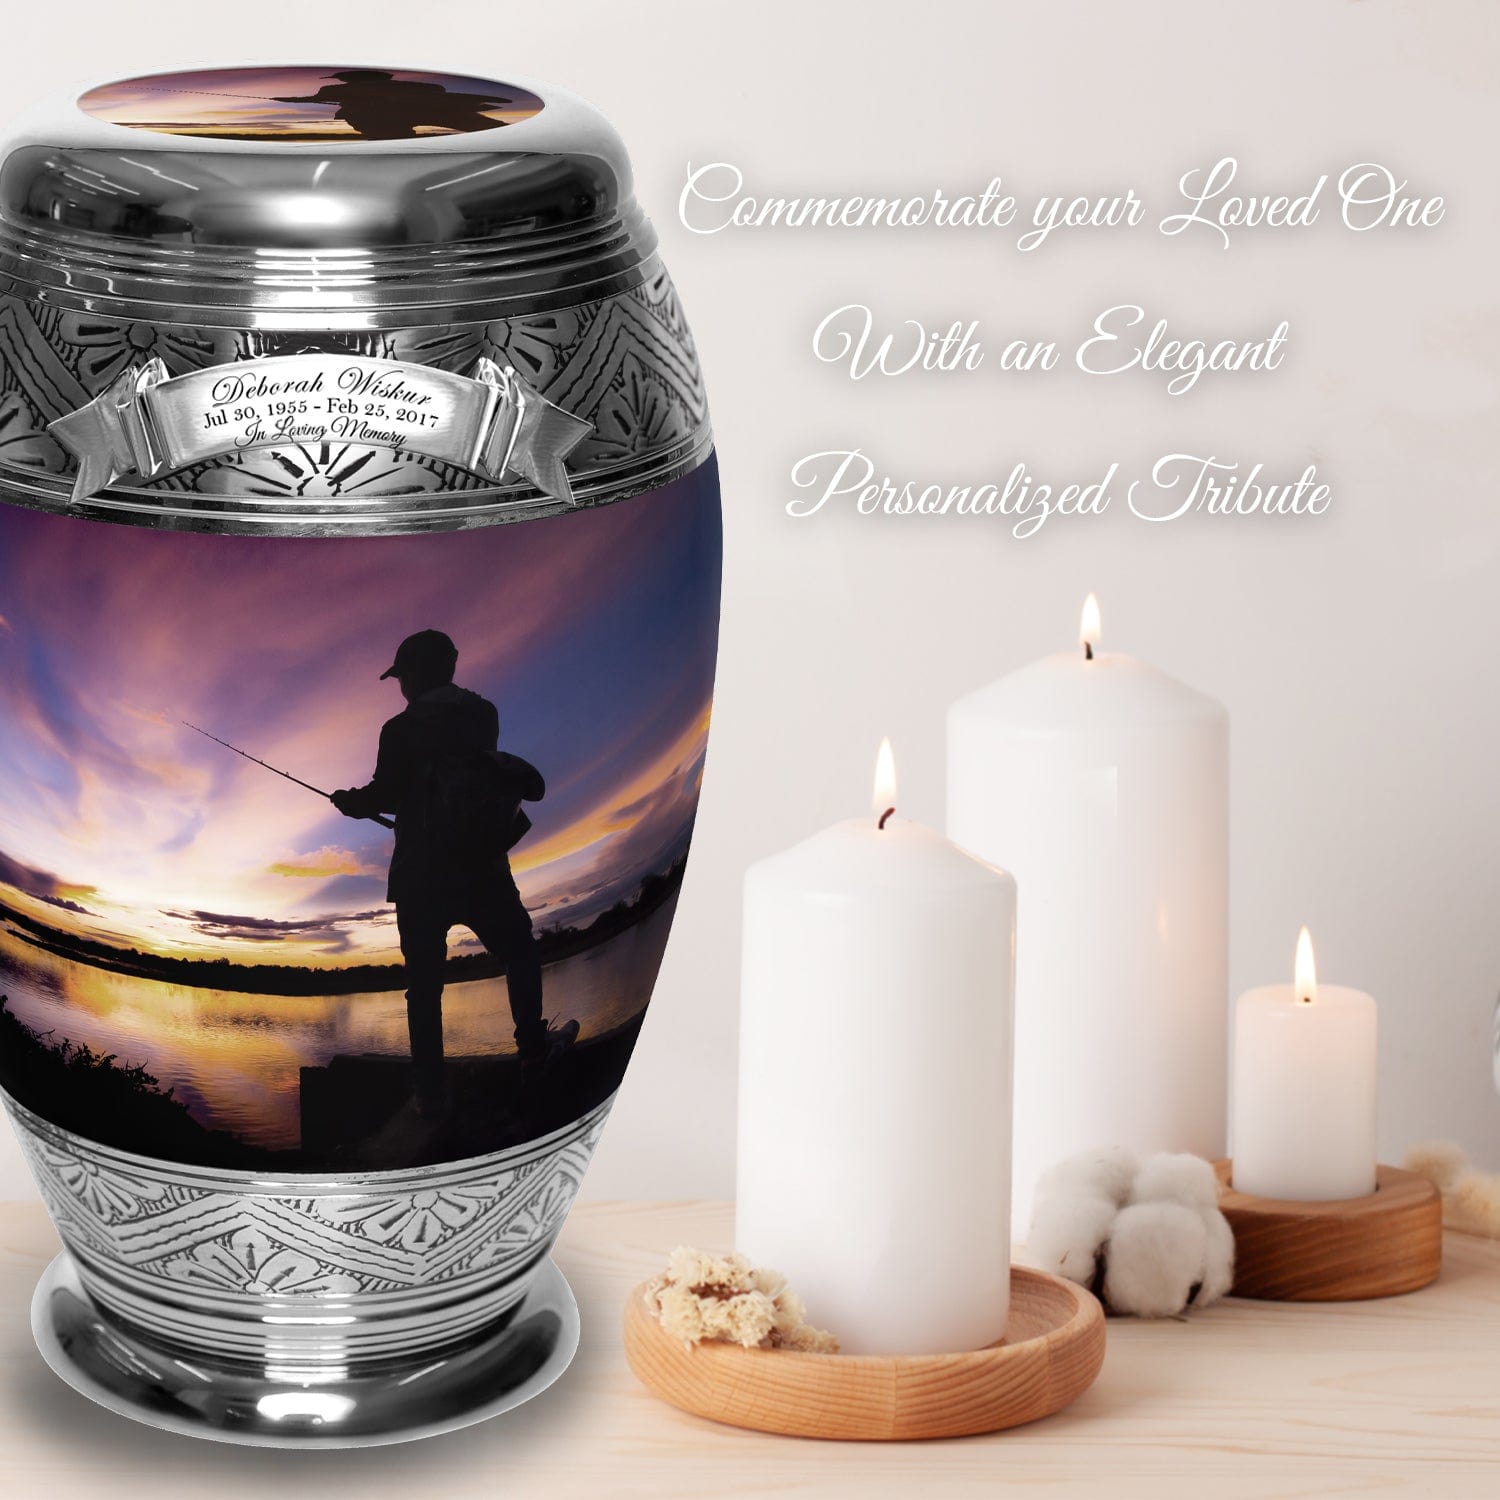  Gone Large Cremation Fishing Urns for Human Ashes Adult Male  Female - 200 Lbs Decorative Men Urn Fishing, Urns for Dad, Men, Human  Ashes